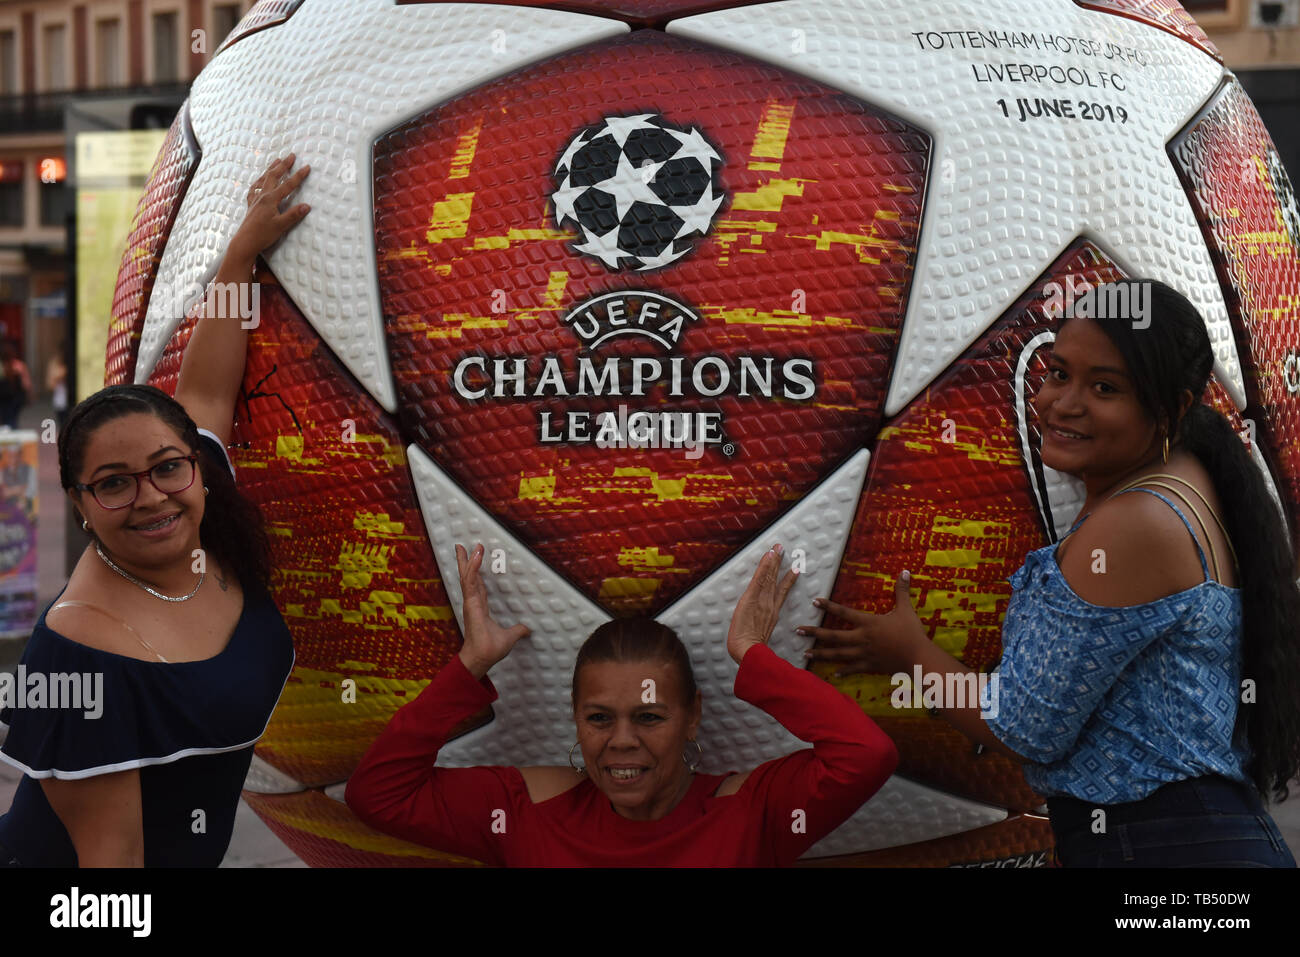 People are seen posing for a picture with an advertisement of the 2019 Champions League Final in Madrid. Madrid will host the UEFA Champions League final between Liverpool FC and Tottenham Hotspur on June 1, 2019 at the Wanda Metropolitano Stadium. Stock Photo